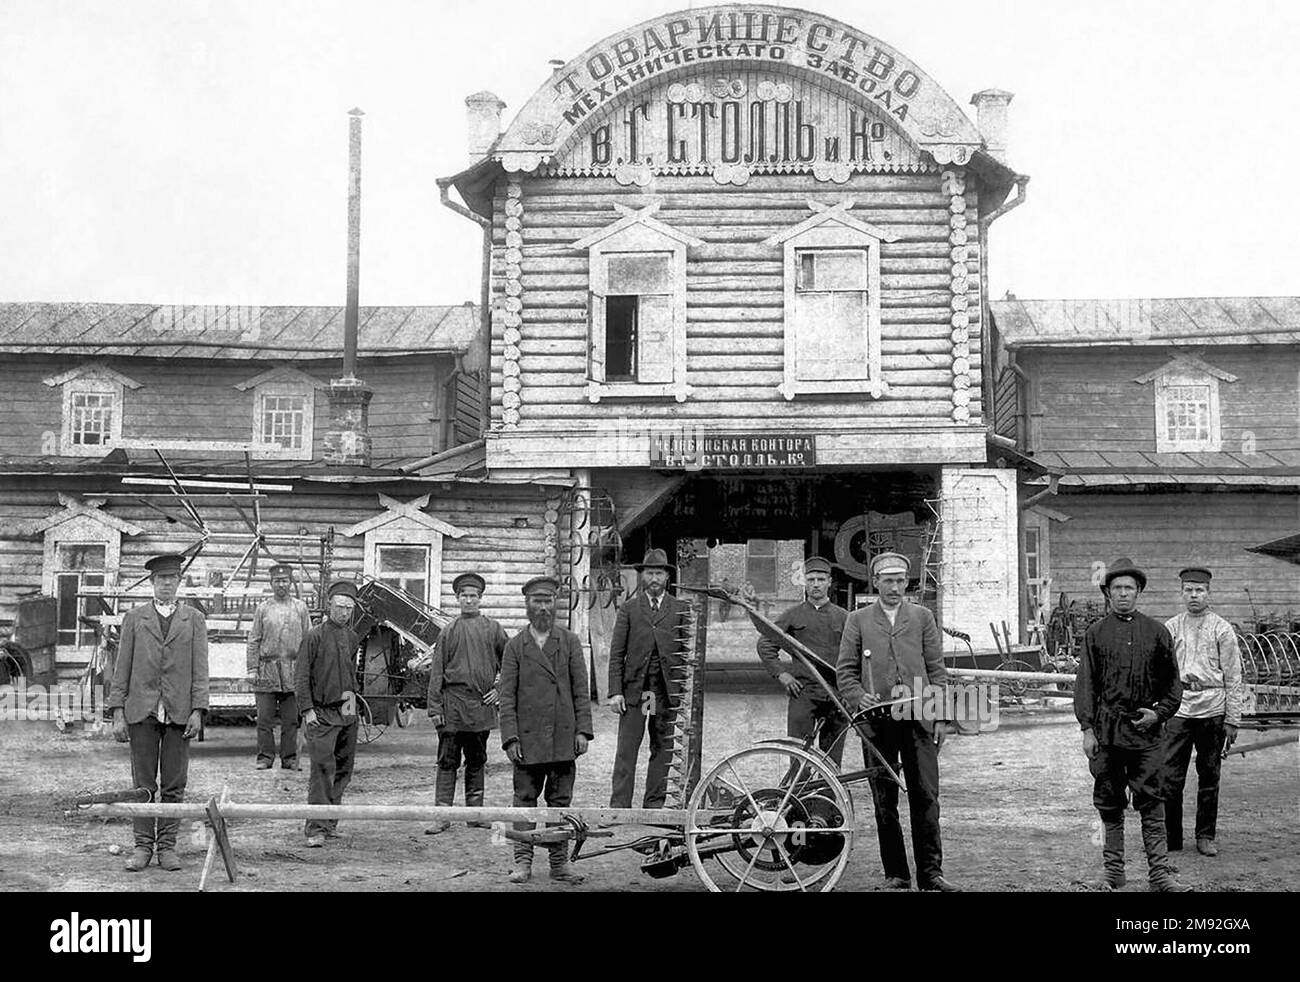 Workers standing in front of the Mechanical plant V. G. Stoll & Co. Chelyabinsk office of the partnership ca.  between 1900 and 1915 Stock Photo